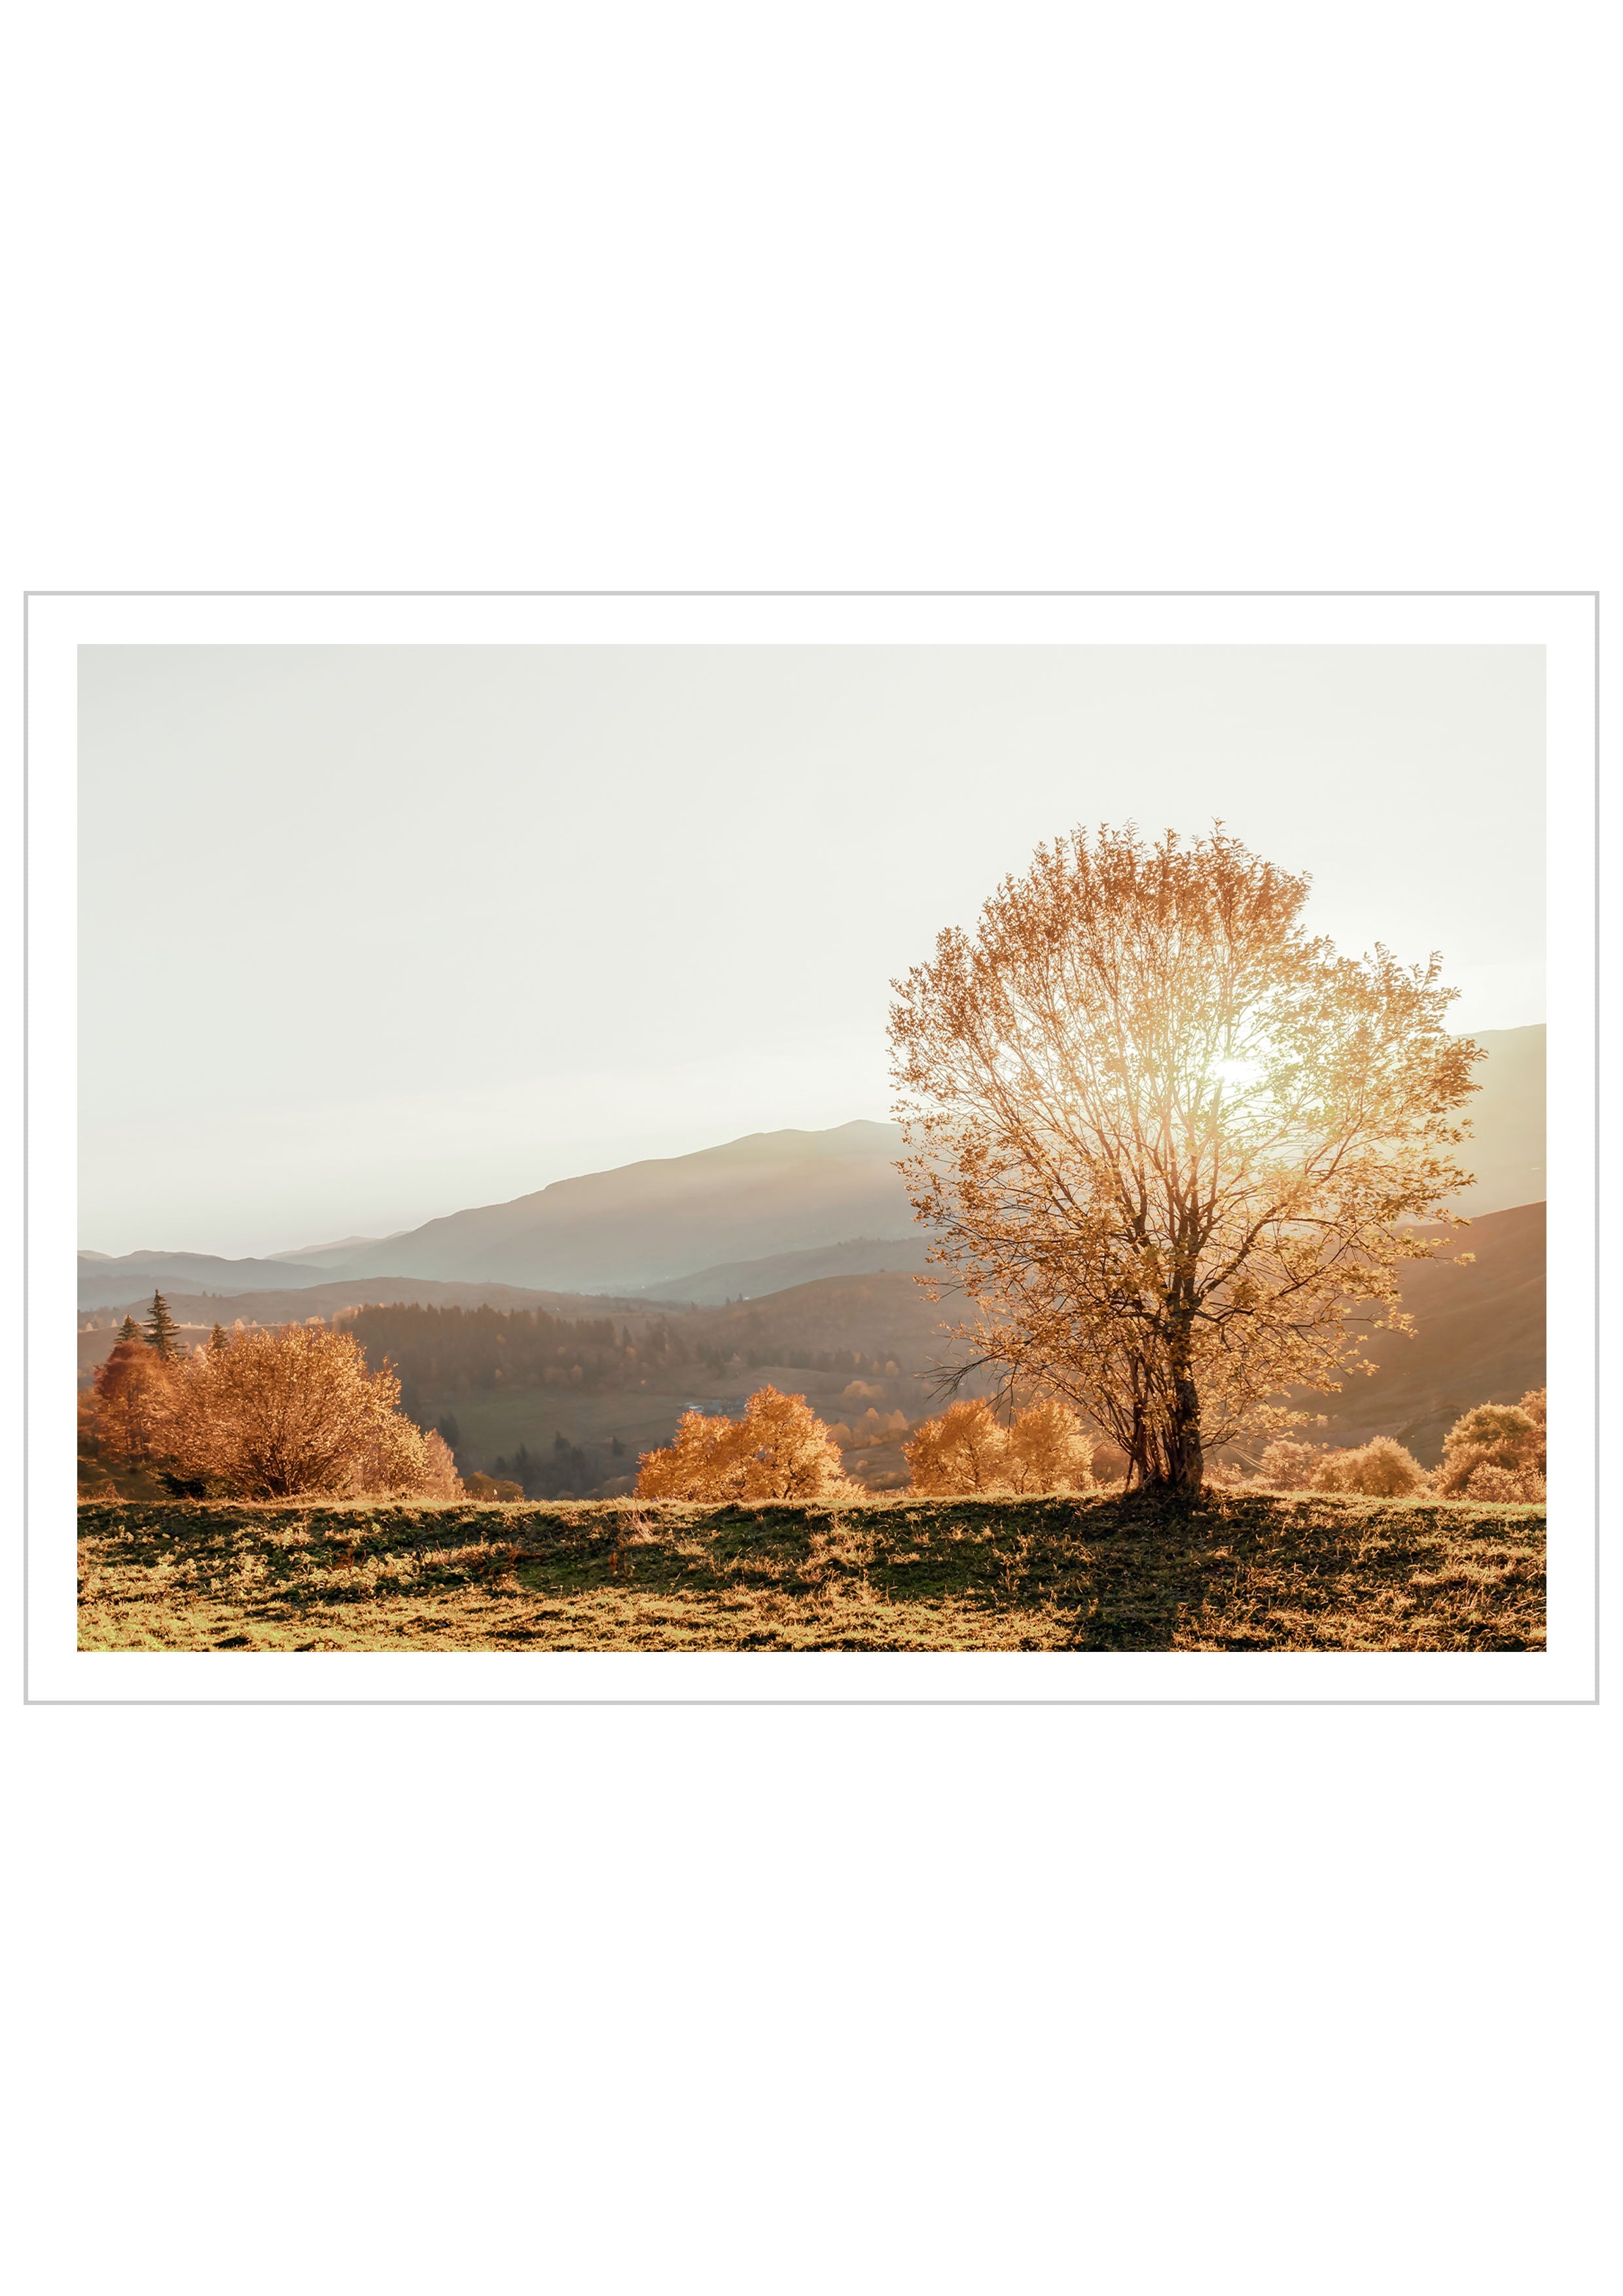 Photo print of a serene fall landscape with a majestic tree that the sun shines through. It highlights the golden colors of the fall leaves. This print is the perfect way to bring the magic of fall into your living space. Let the essence of autumn brighten your home throughout the year.